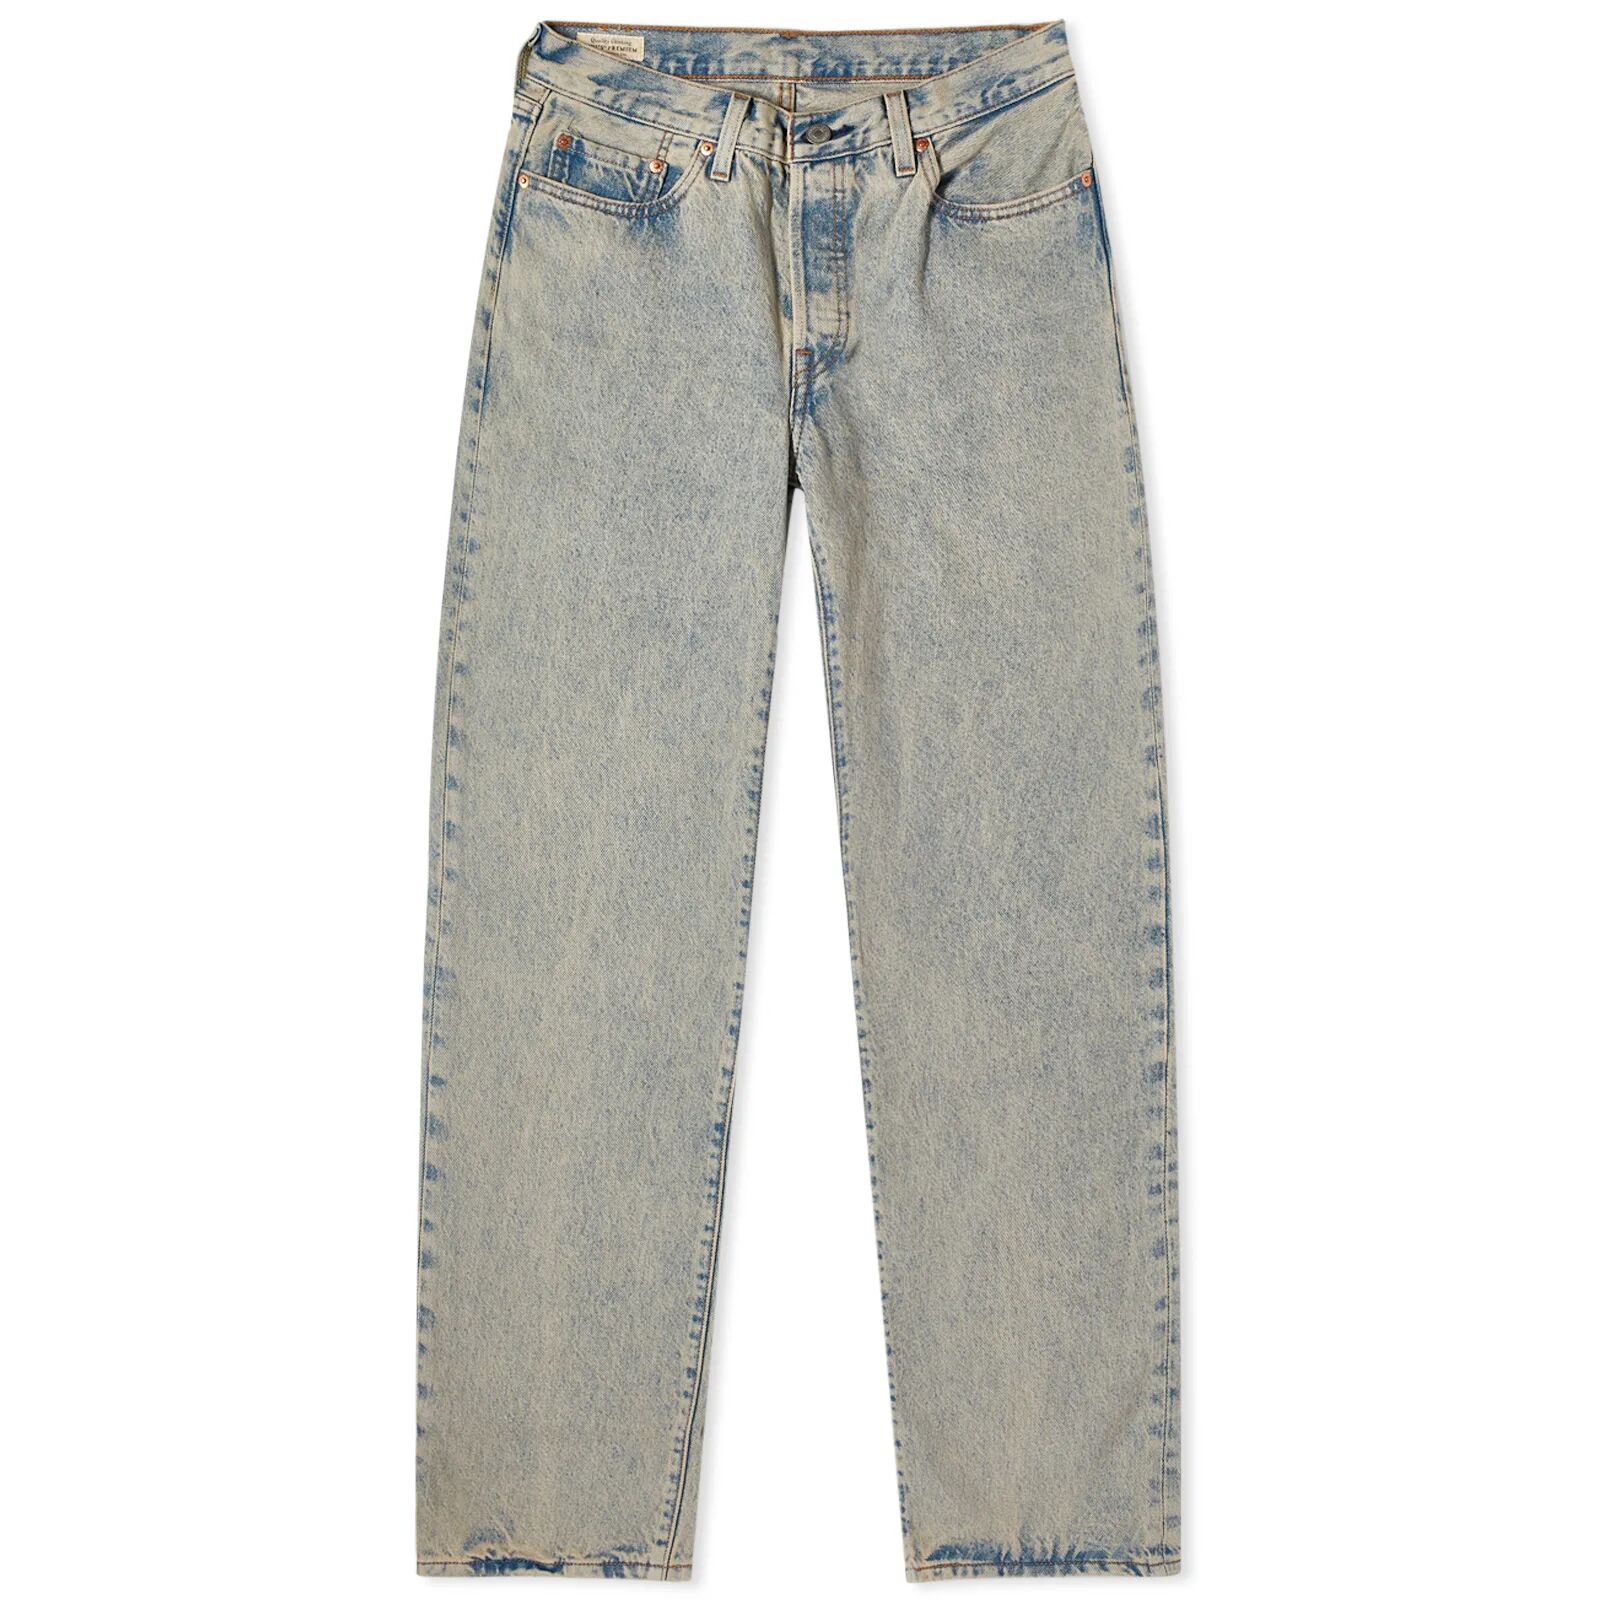 Levi’s Collections Women's Levis Vintage Clothing 501® 90s Jeans in Where'S The Tint, Size 32"